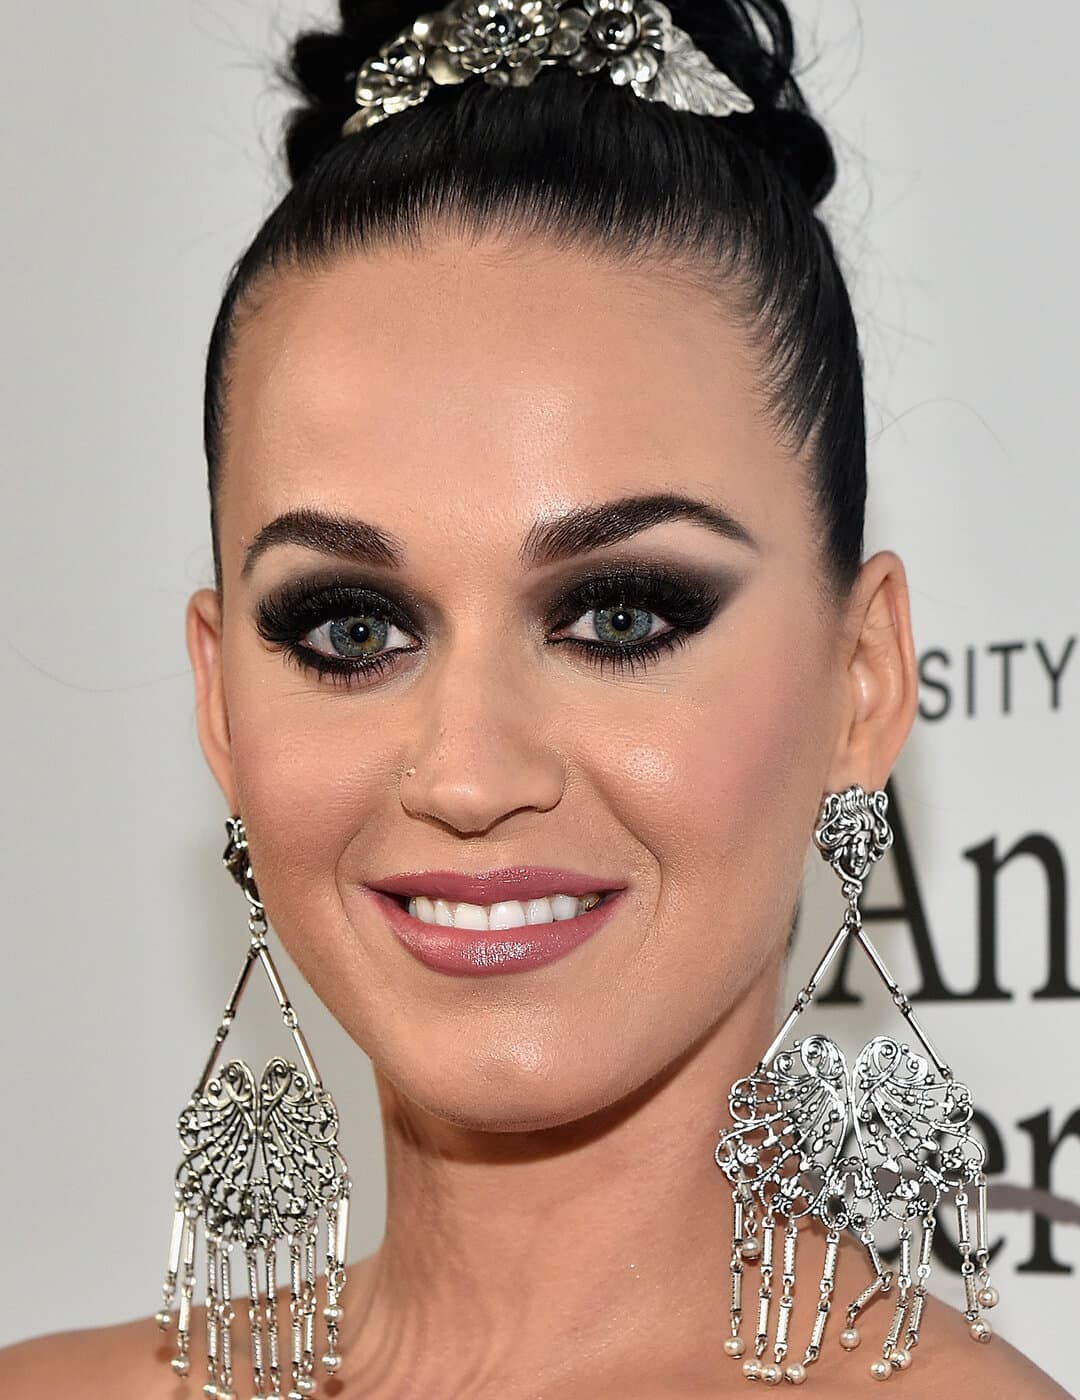 Katy Perry rocking a gradient smoky eye makeup look and silver dangling earrings on the red carpet